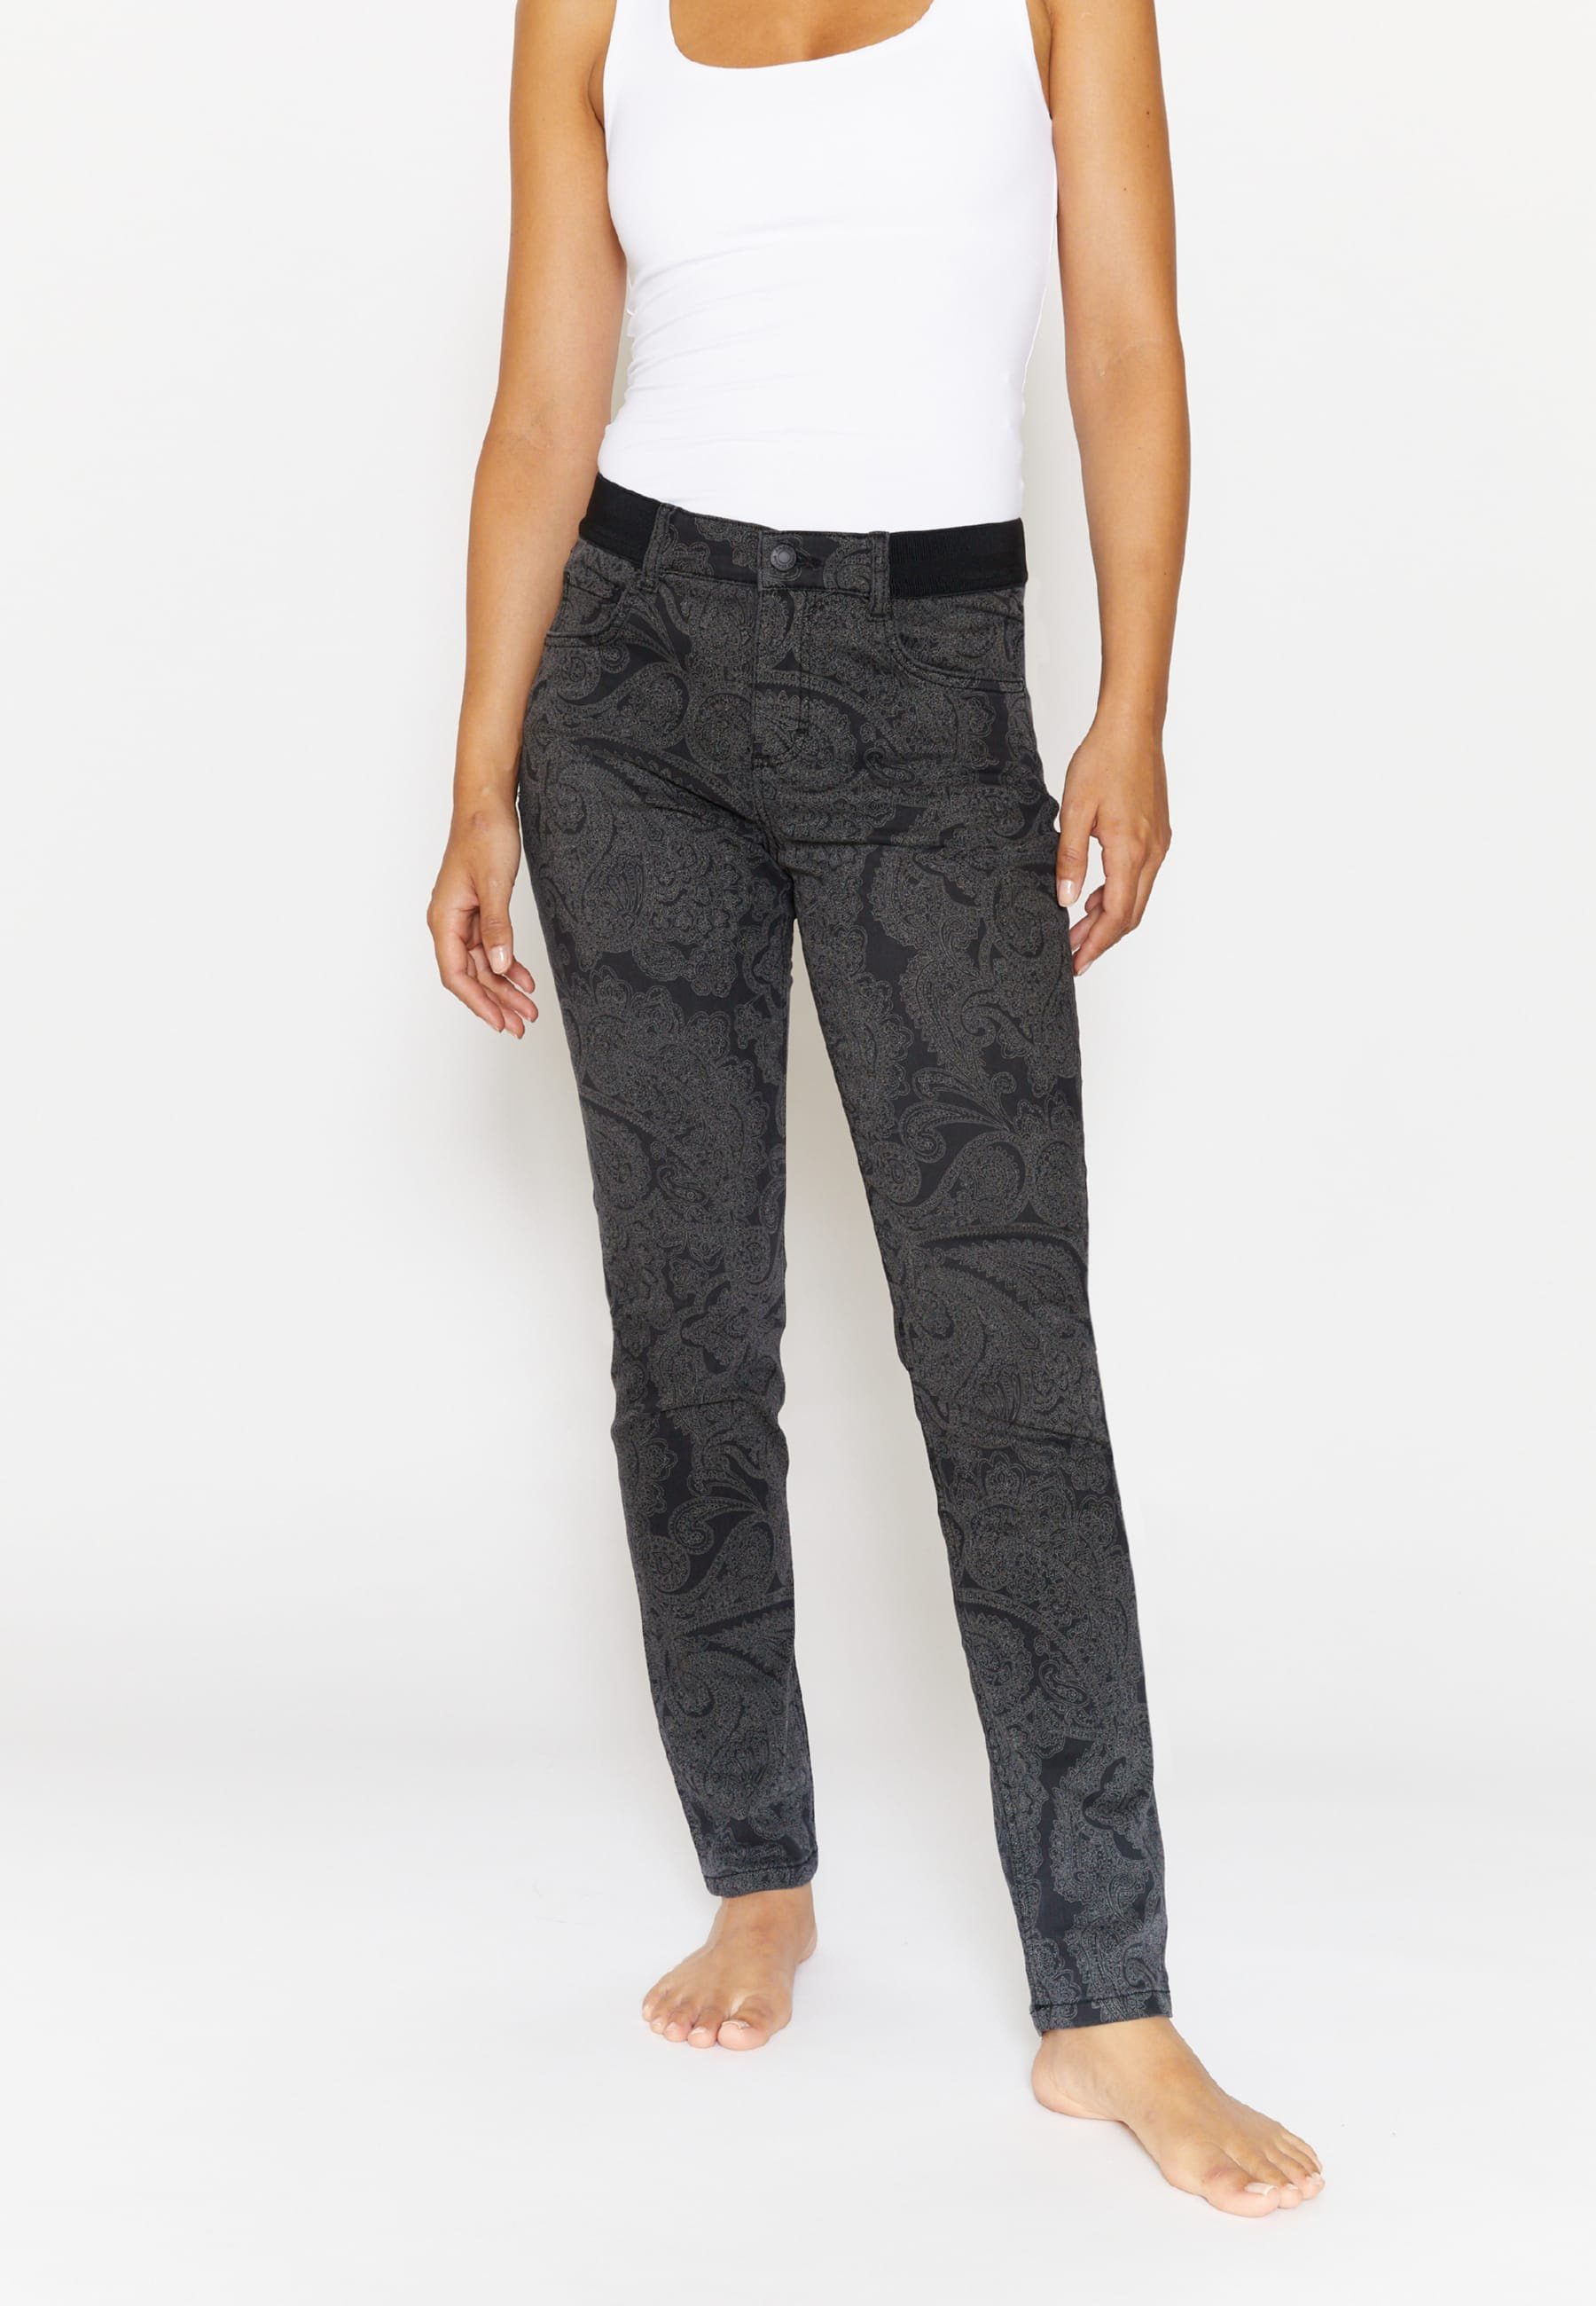 Jeans anthrazit Slim-fit-Jeans mit Label-Applikationen Size mit One ANGELS Paisley-Muster